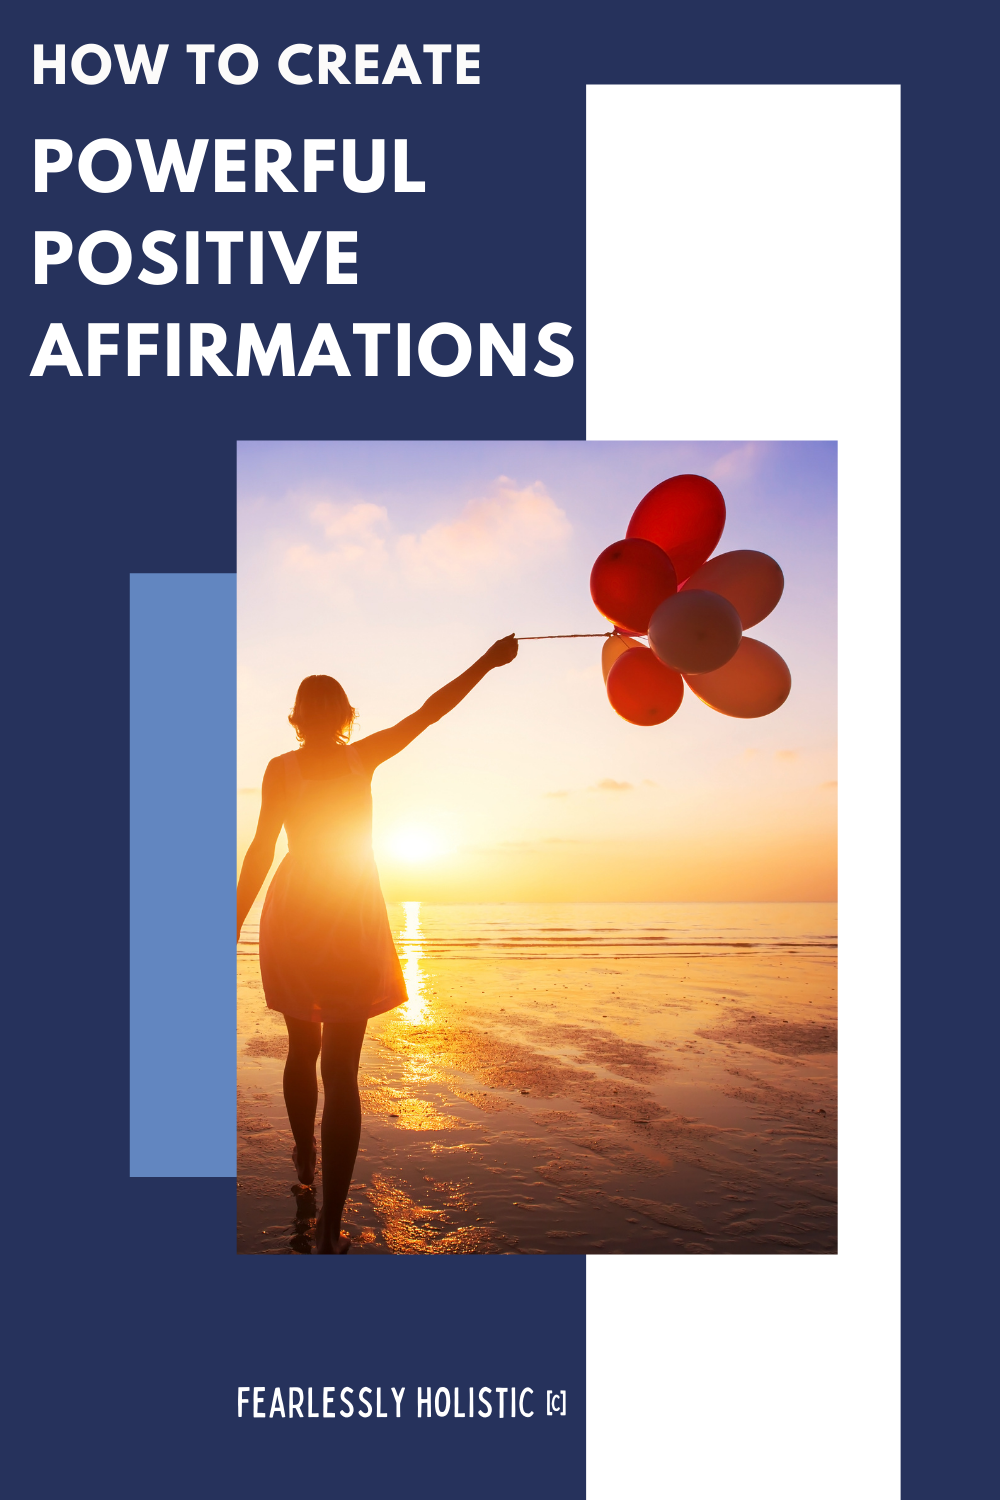 22 Tips for Powerful Positive Affirmations